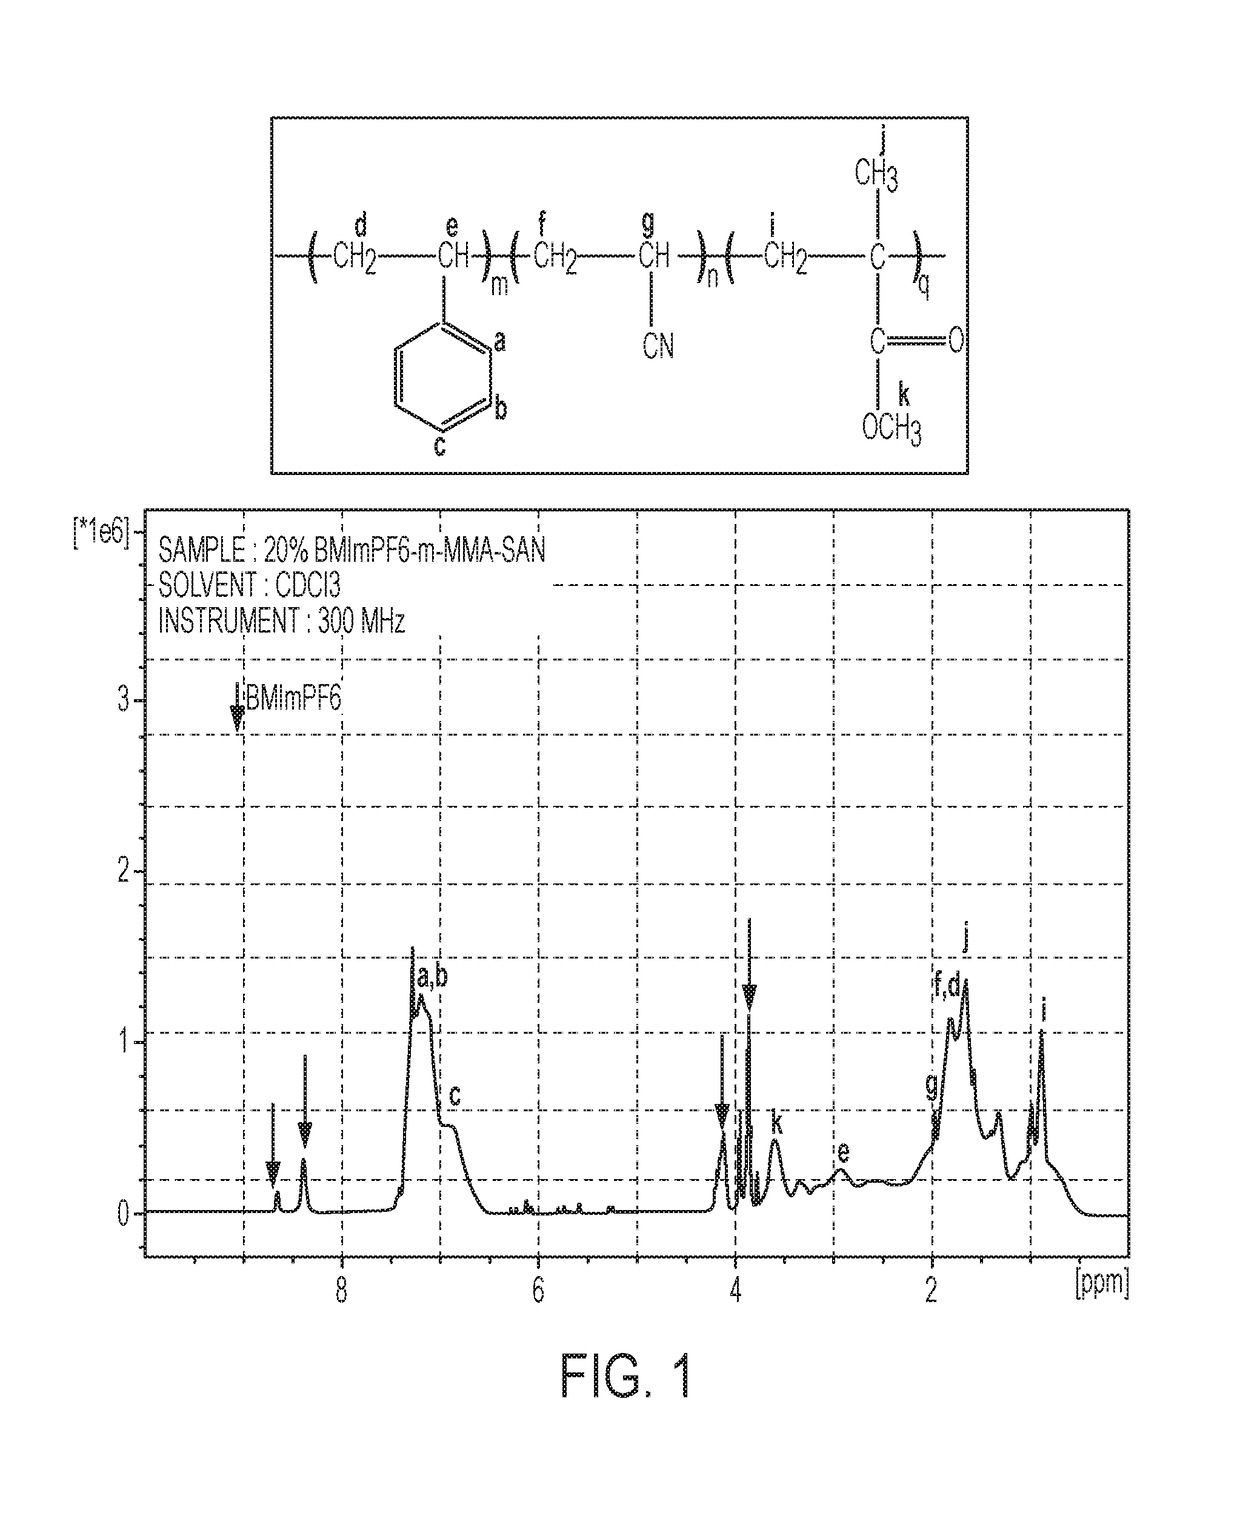 Ion dipoles containing polymer compositions